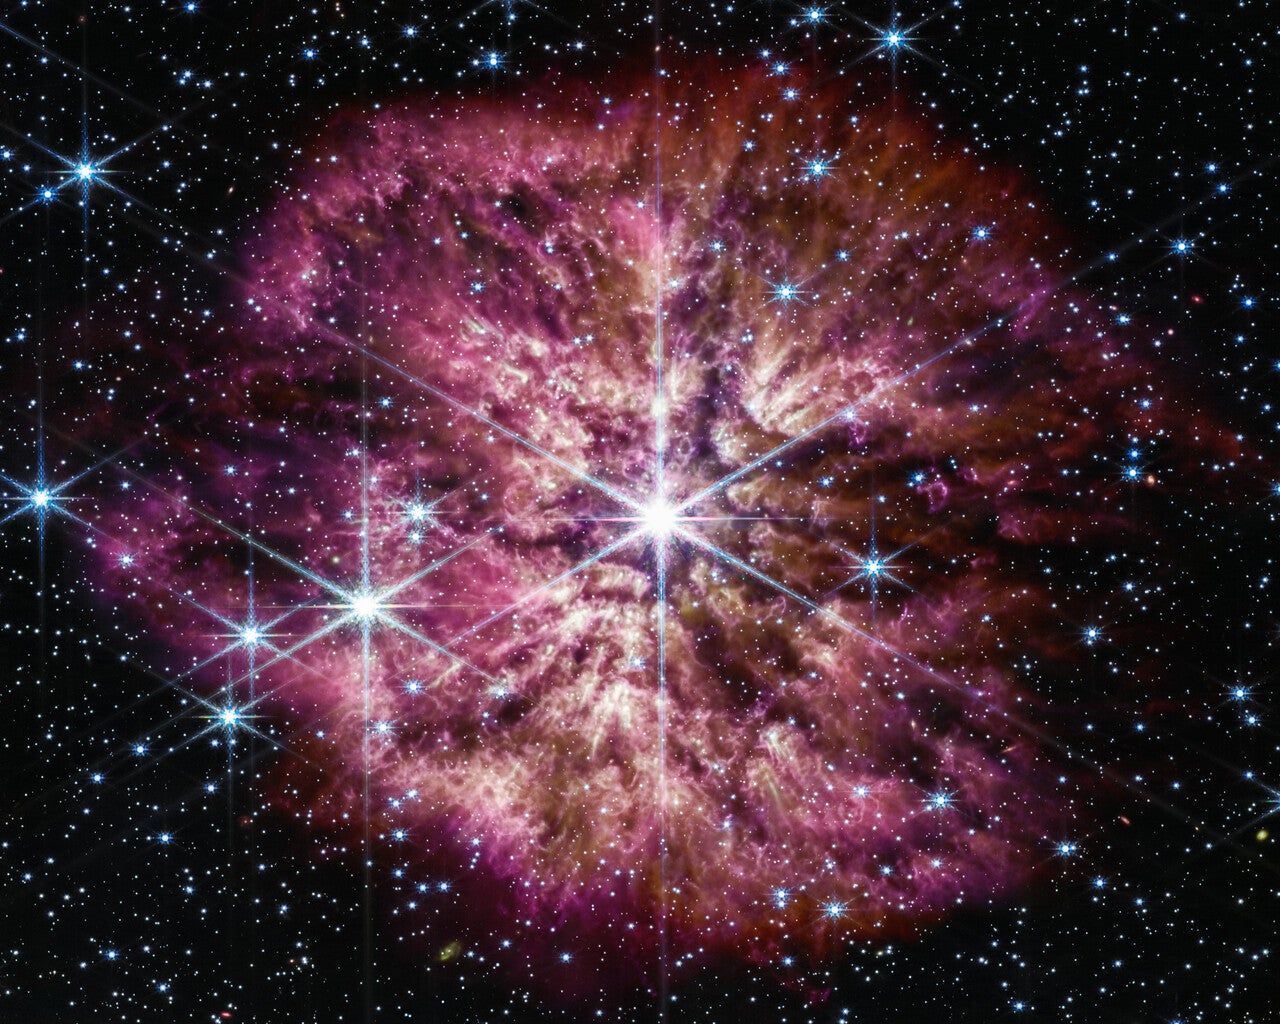 Newest Webb Image Is a Stunning View of a Star’s Penultimate Stage